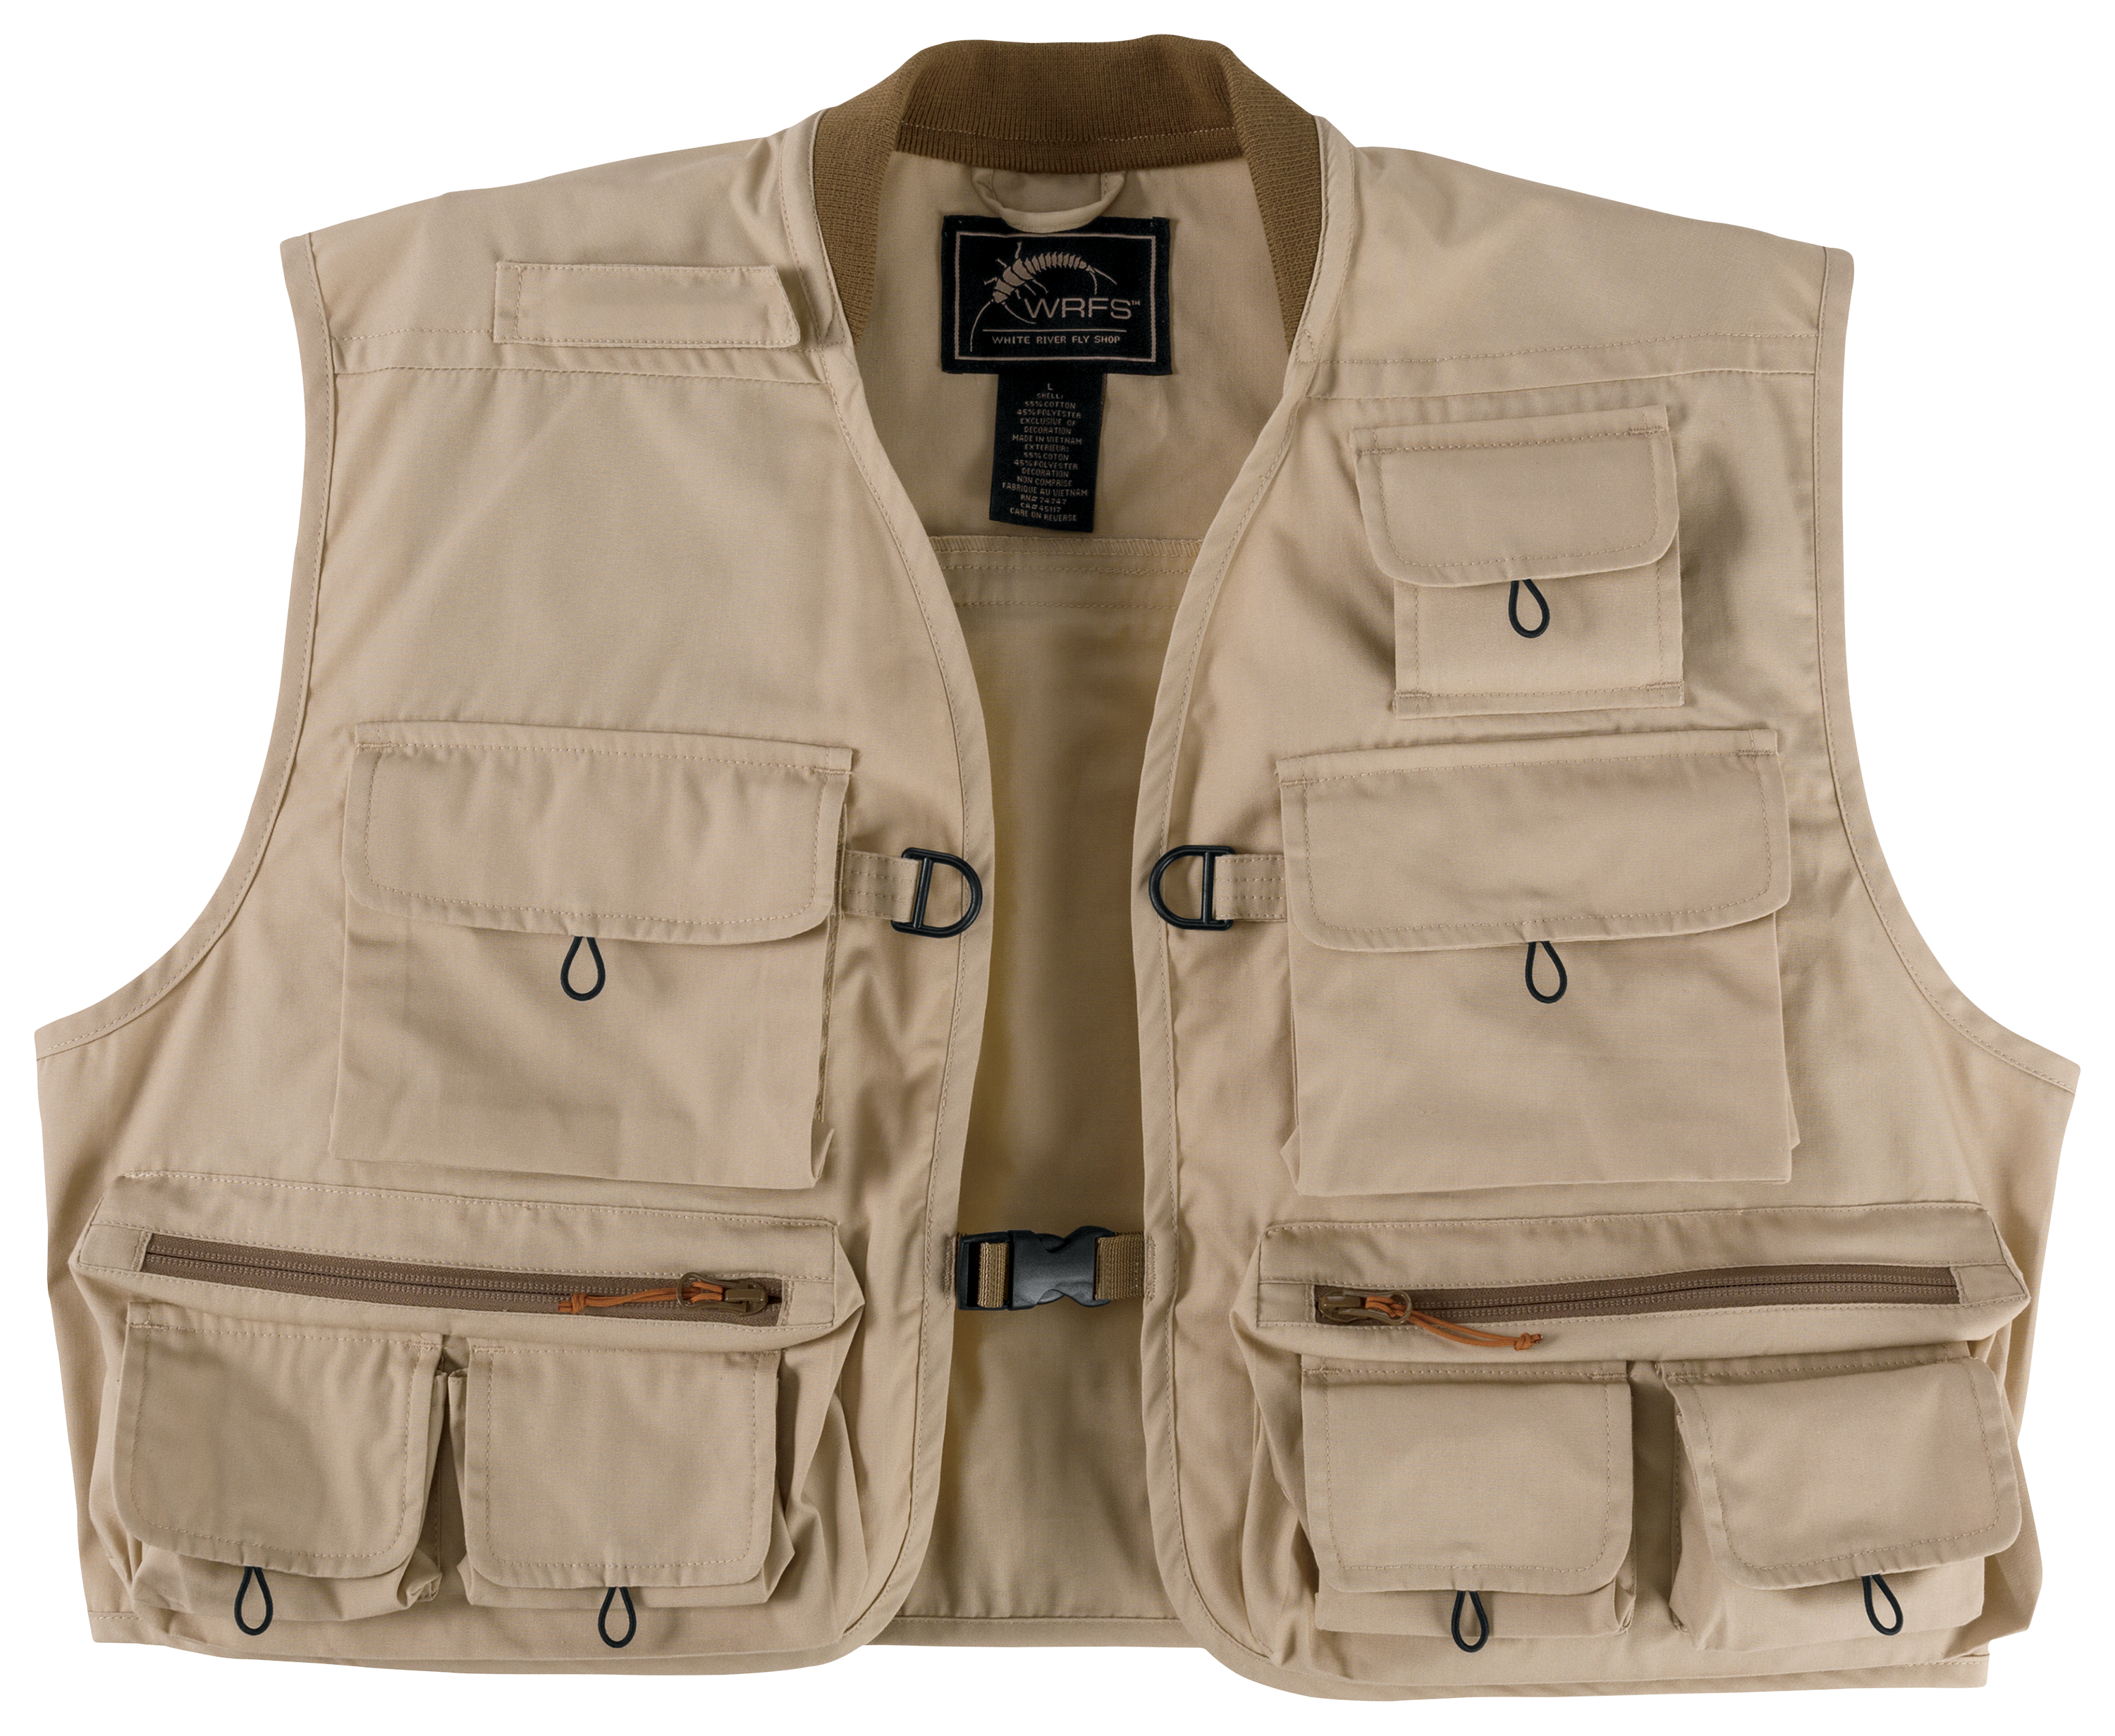 Orvis Clearwater Fishing Vest - Andy Thornal Company